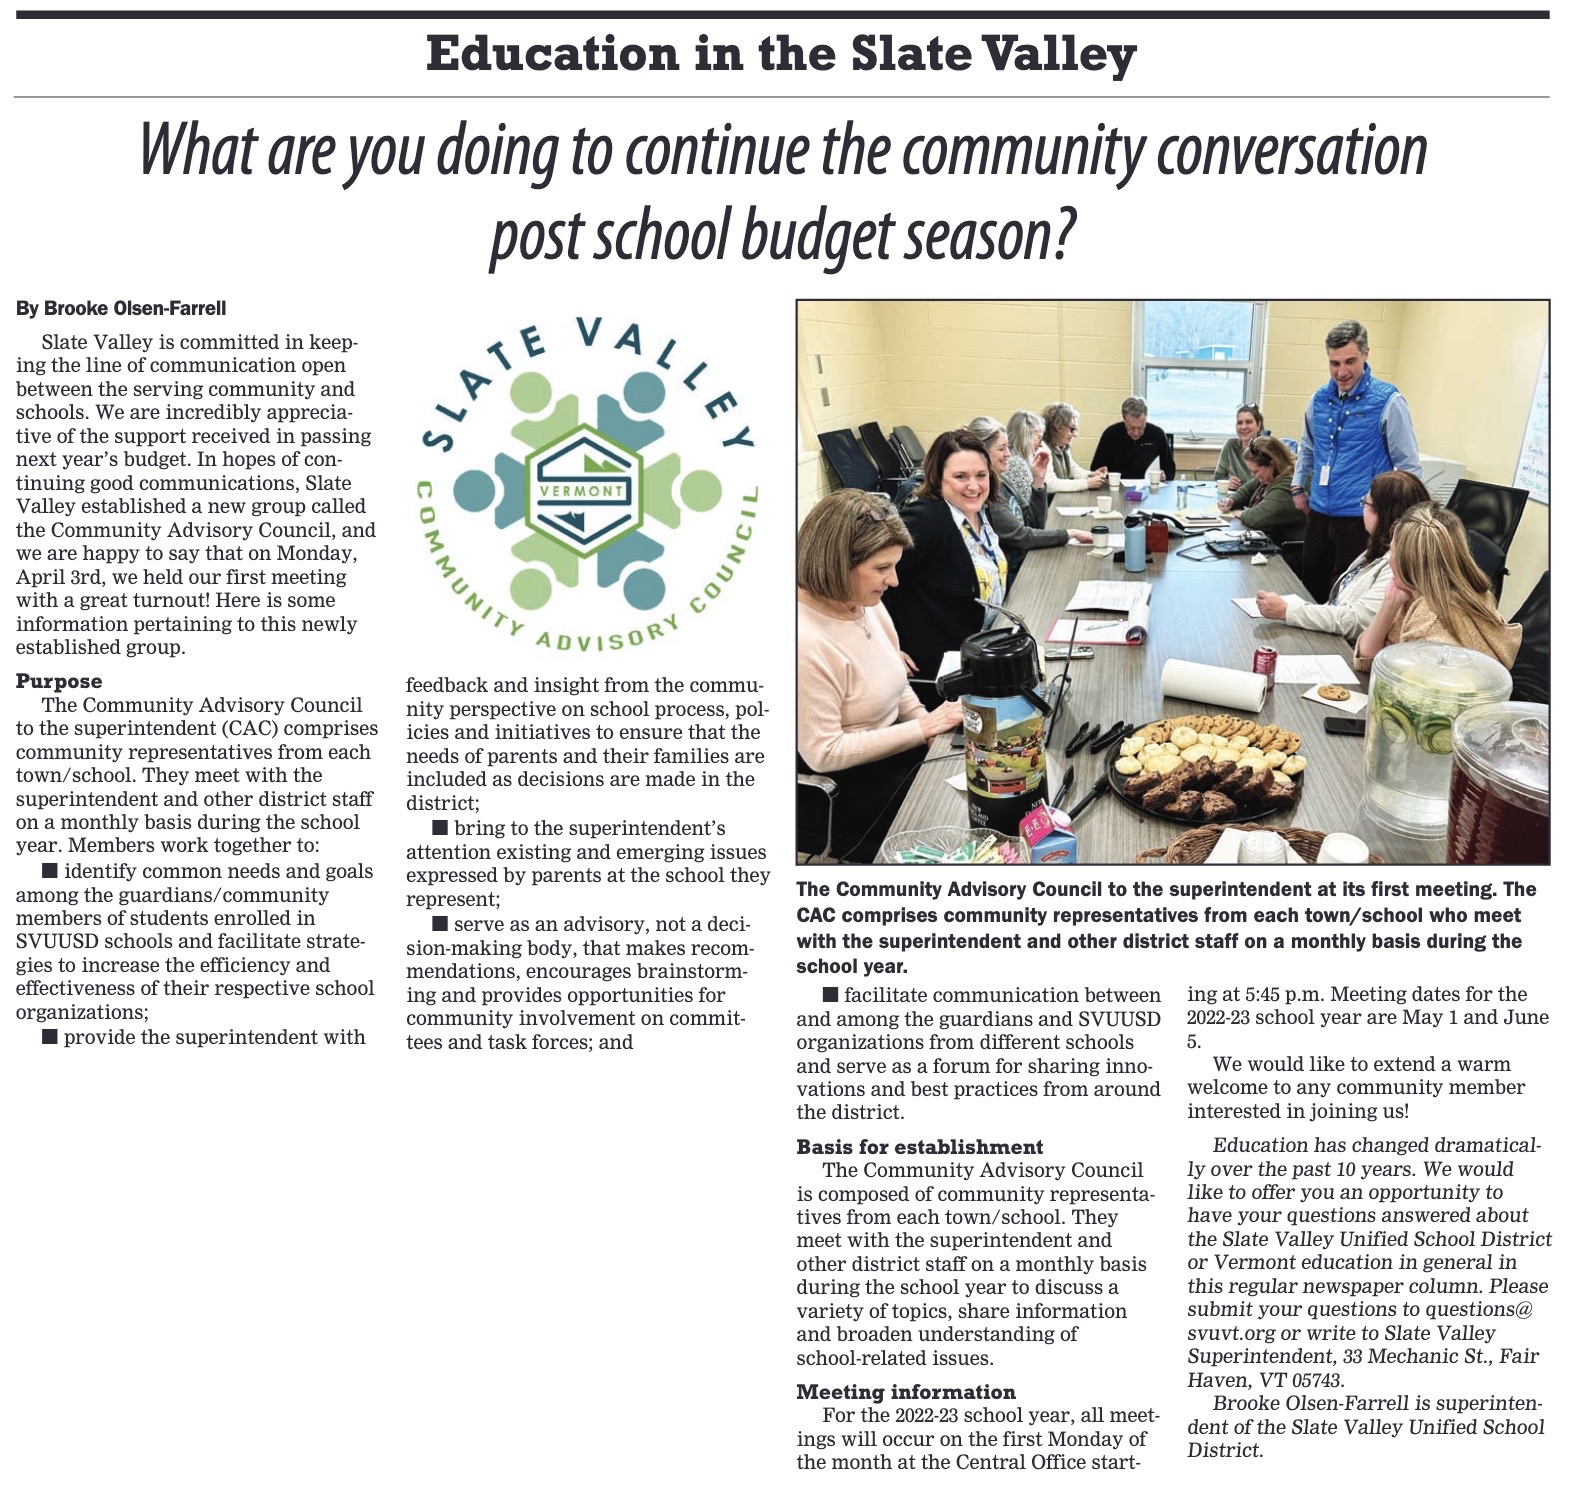 Education in the Slate Valley article